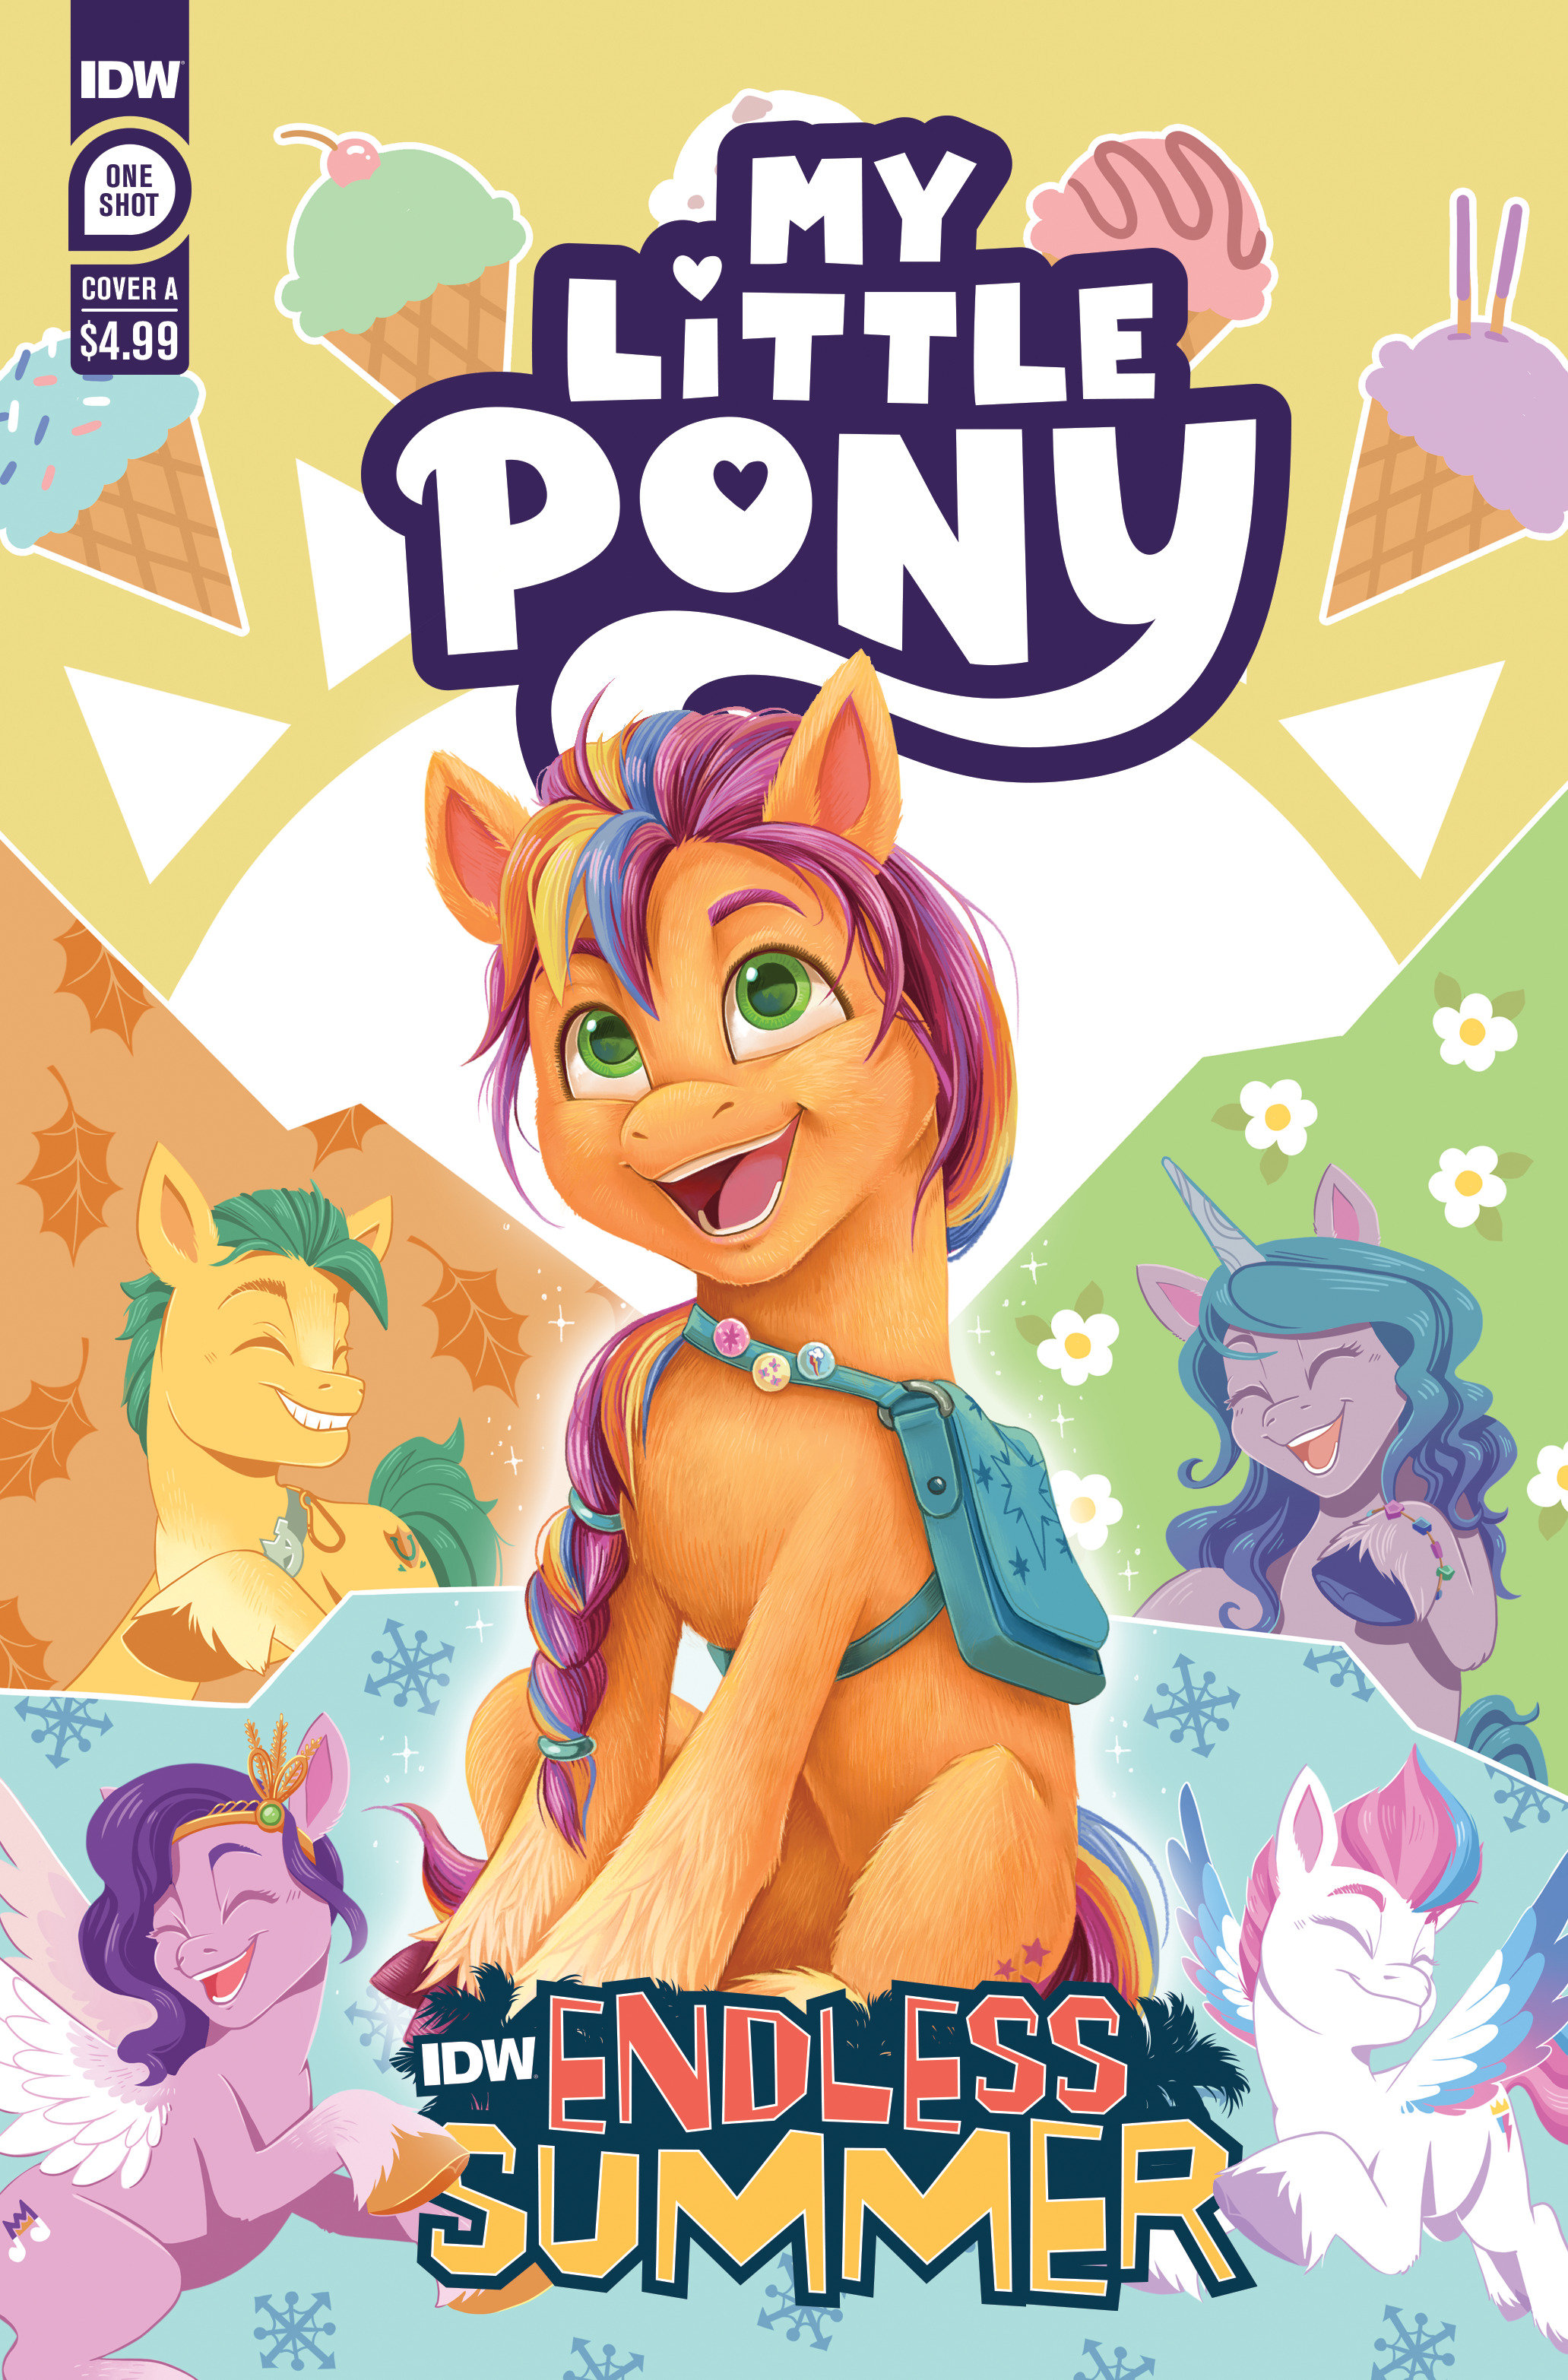 IDW Endless Summer—My Little Pony Cover A Haines